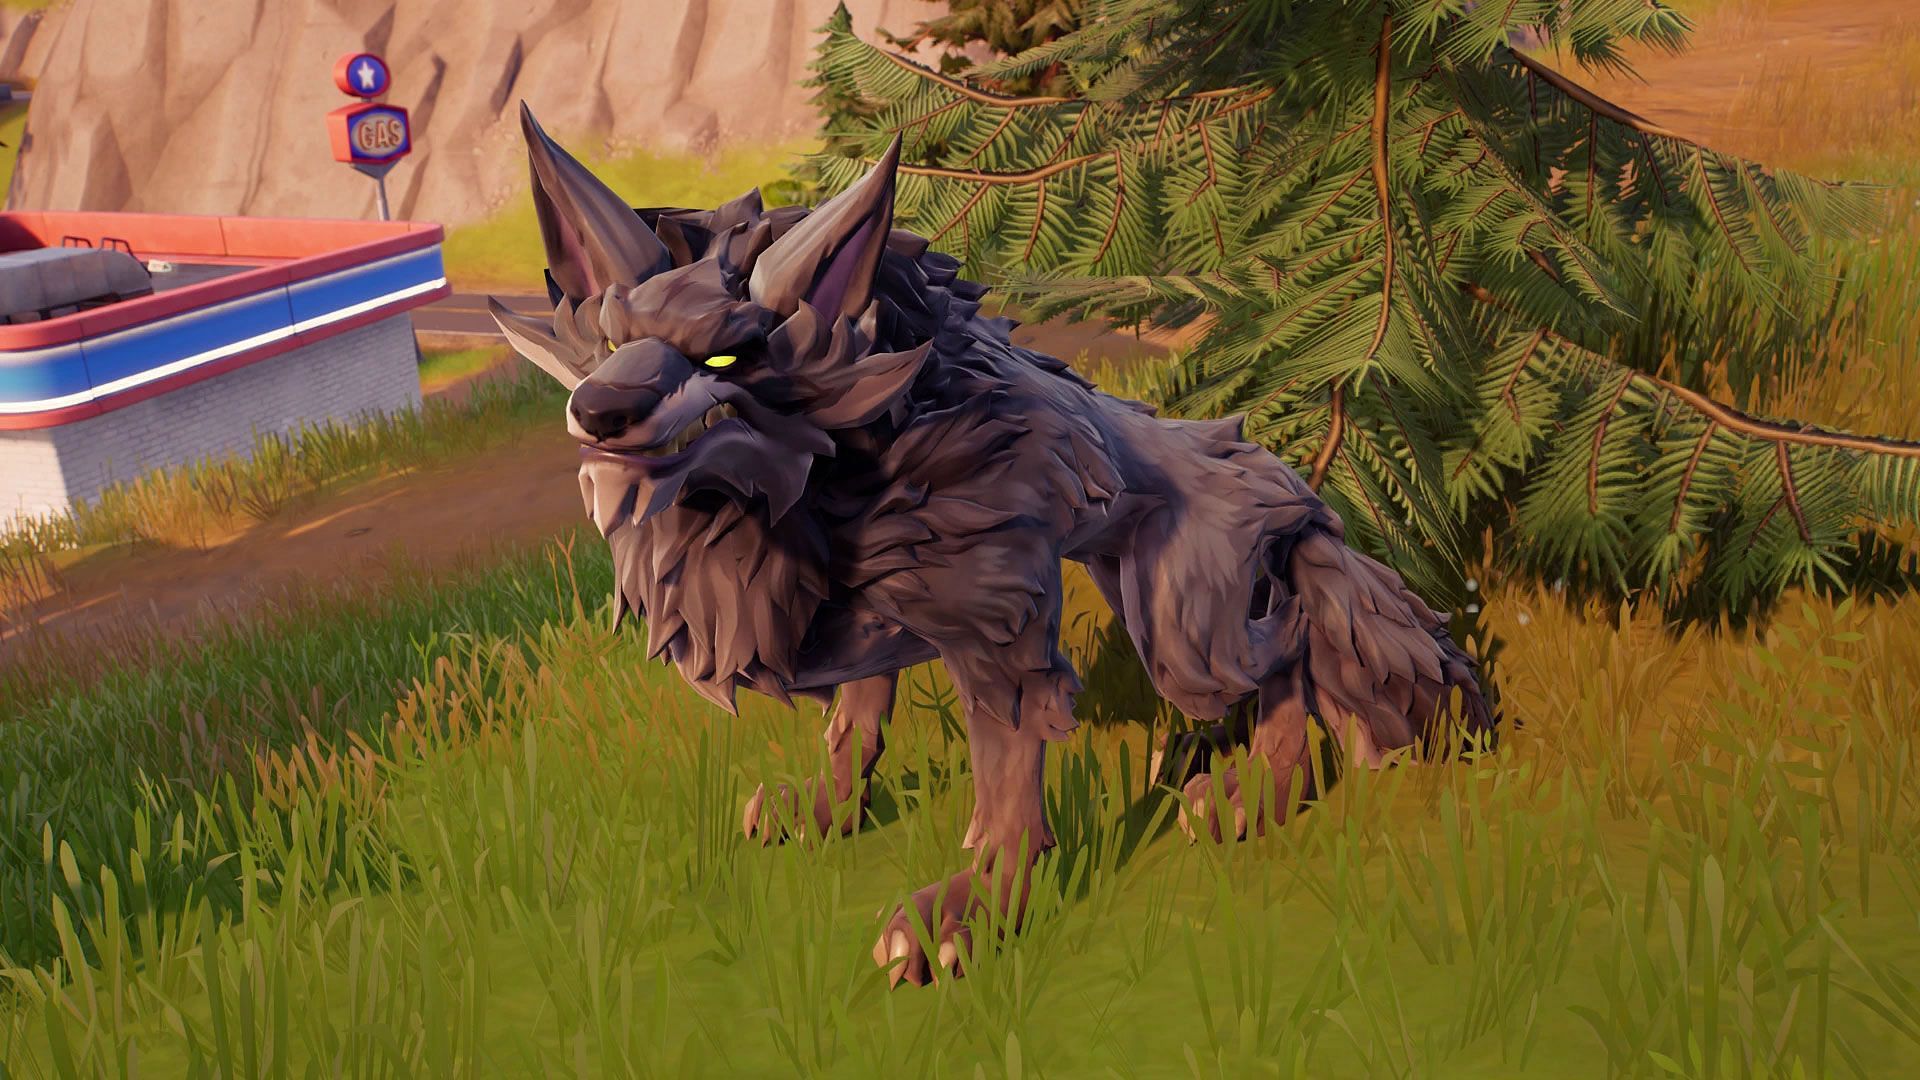 Petting animals is possible in Fortnite Chapter 3 Season 4 (Image via Epic Games)